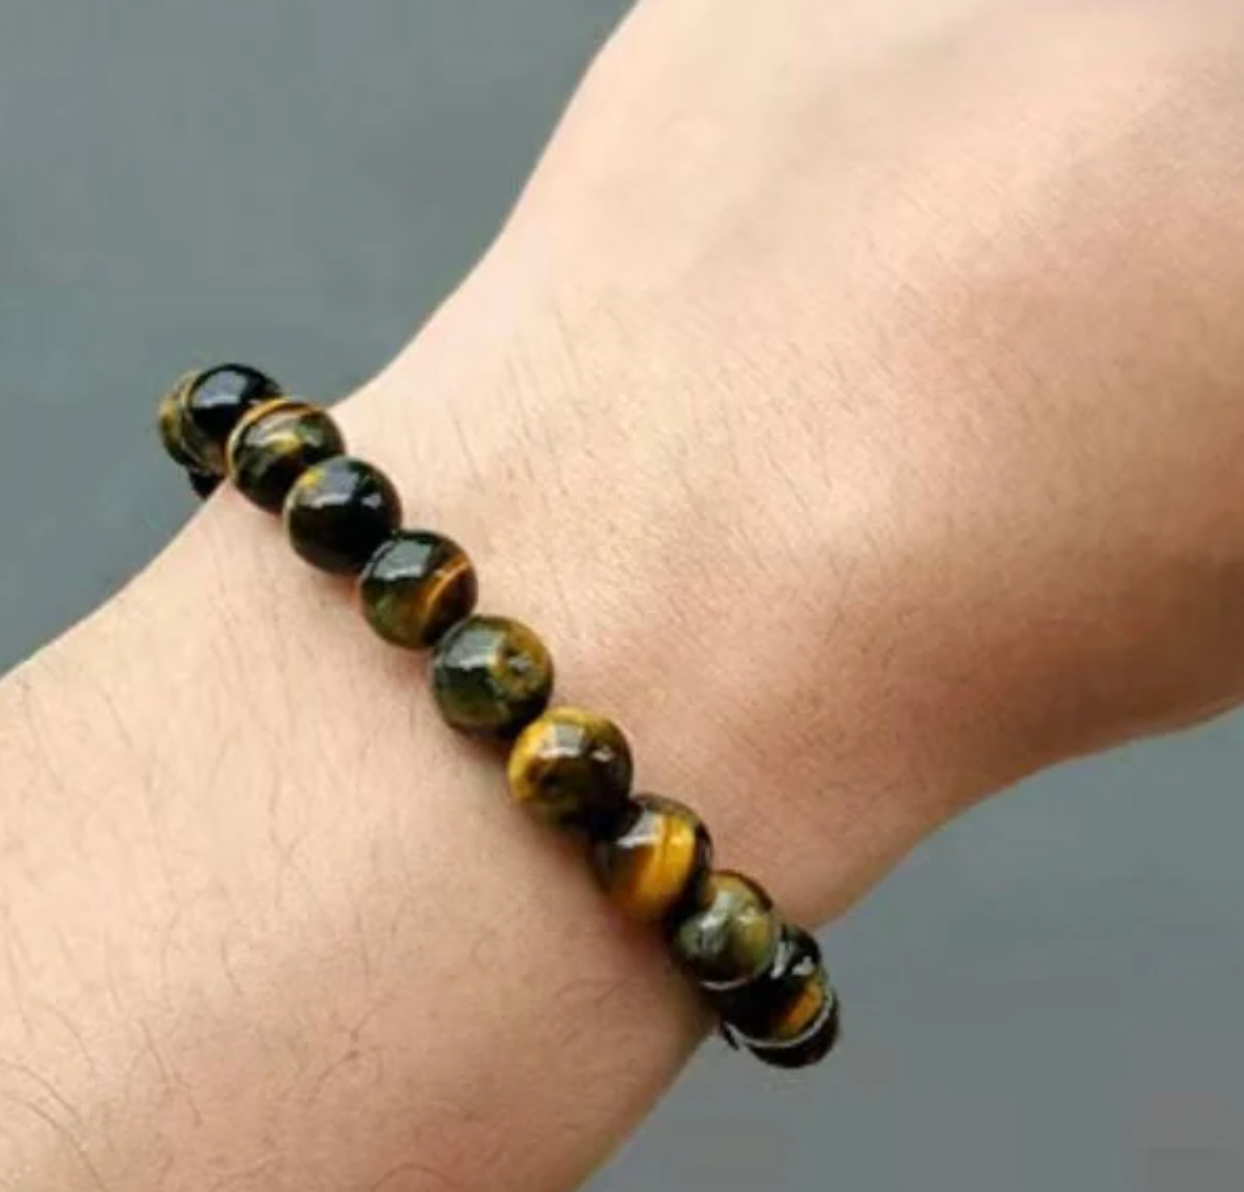 [Earth] Grade A++ Gold Tiger’s Eye stretchy  gemstone beaded Bracelet -  Wealth Attraction